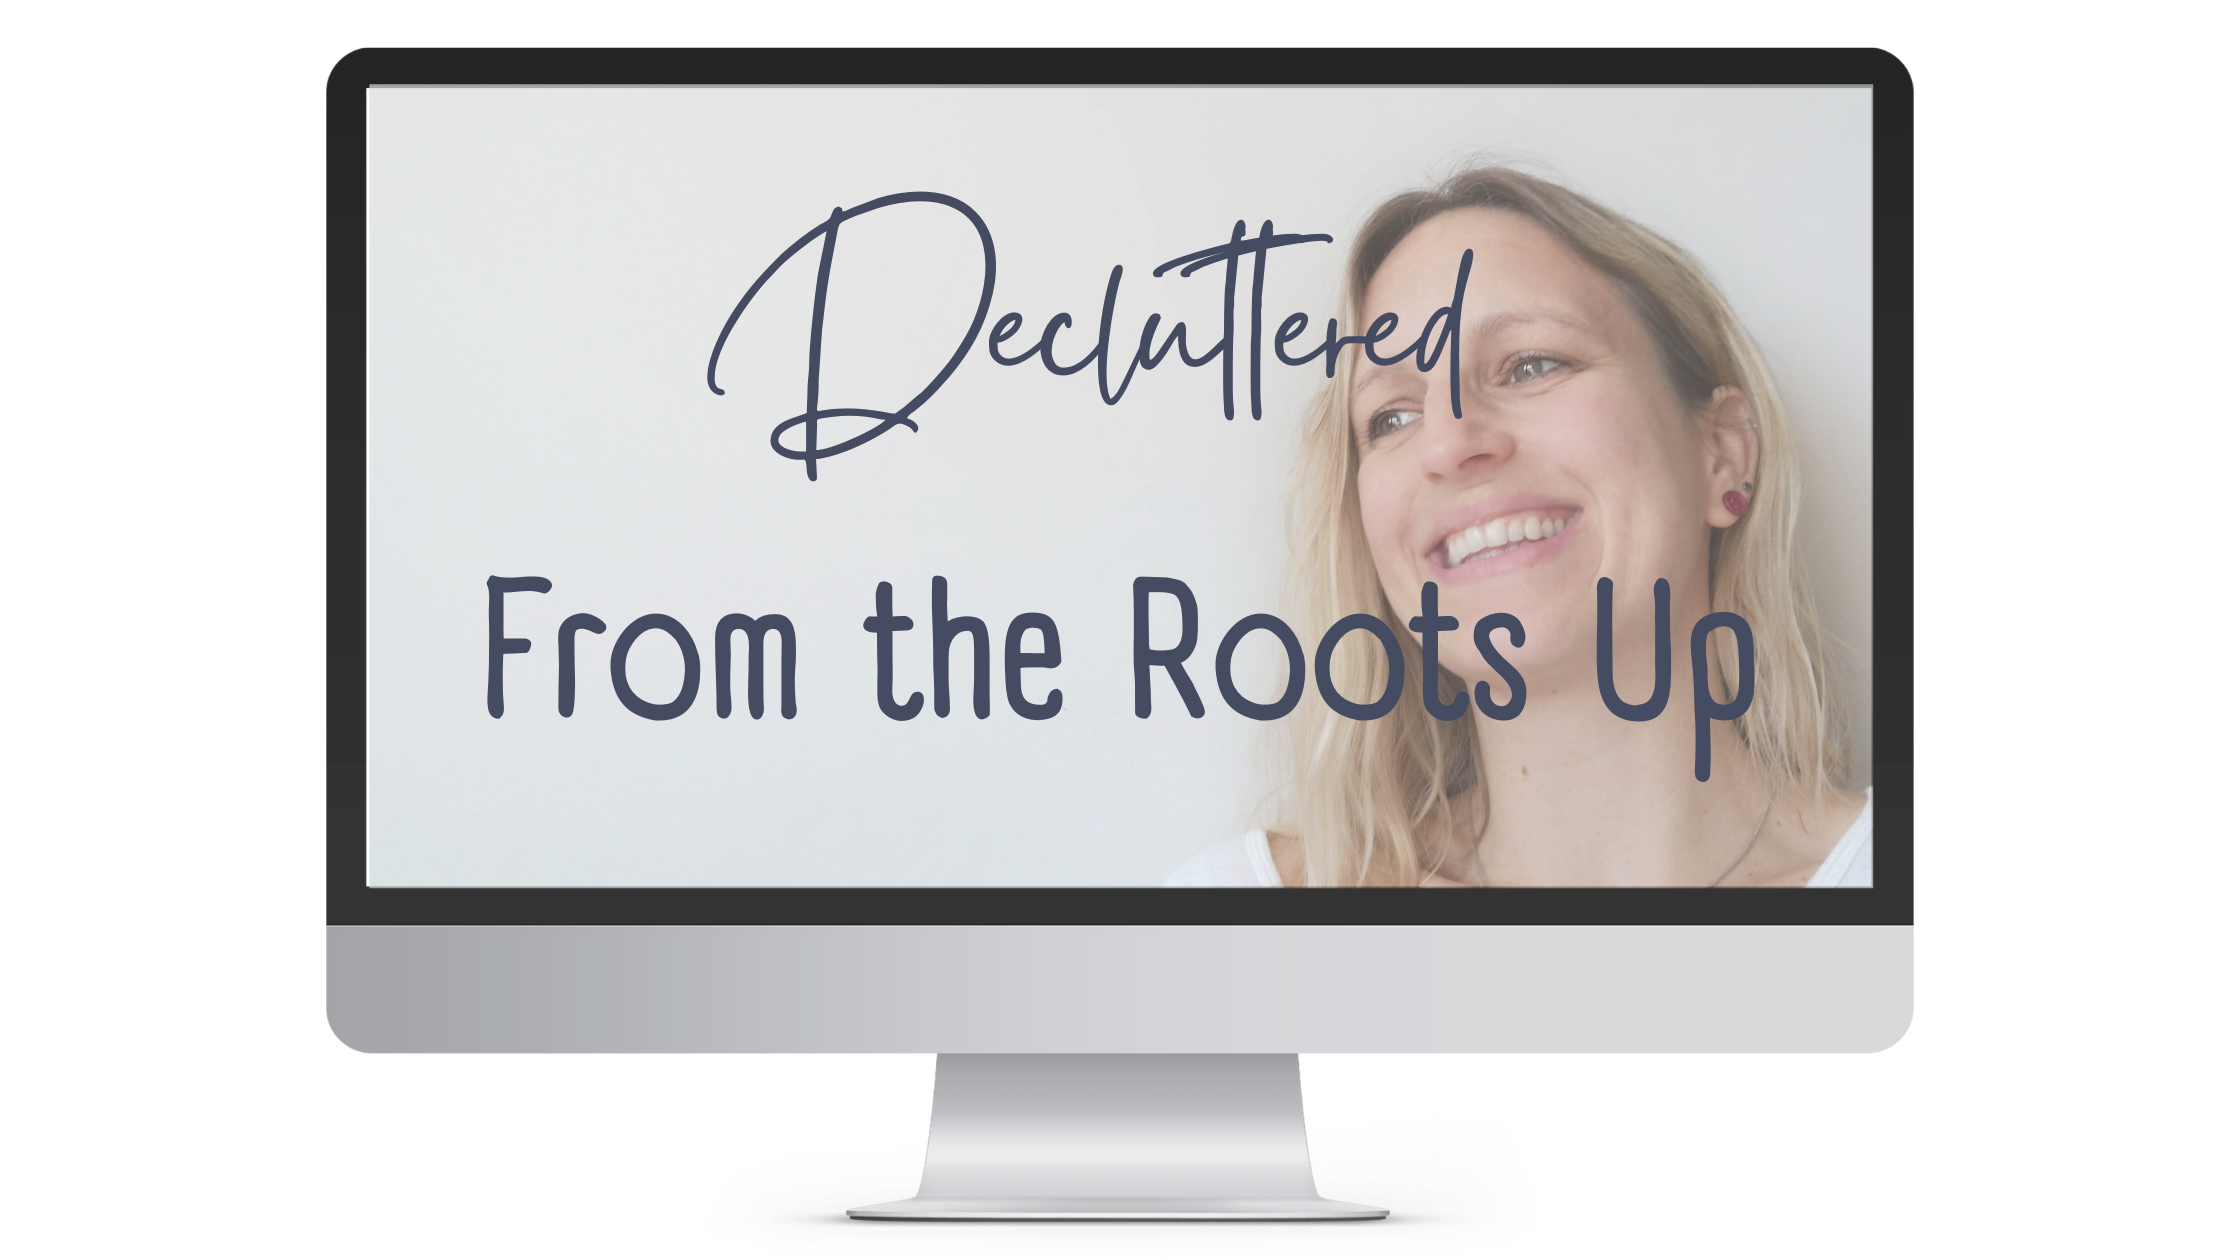 Decluttered From the Roots Up title on a computer screen